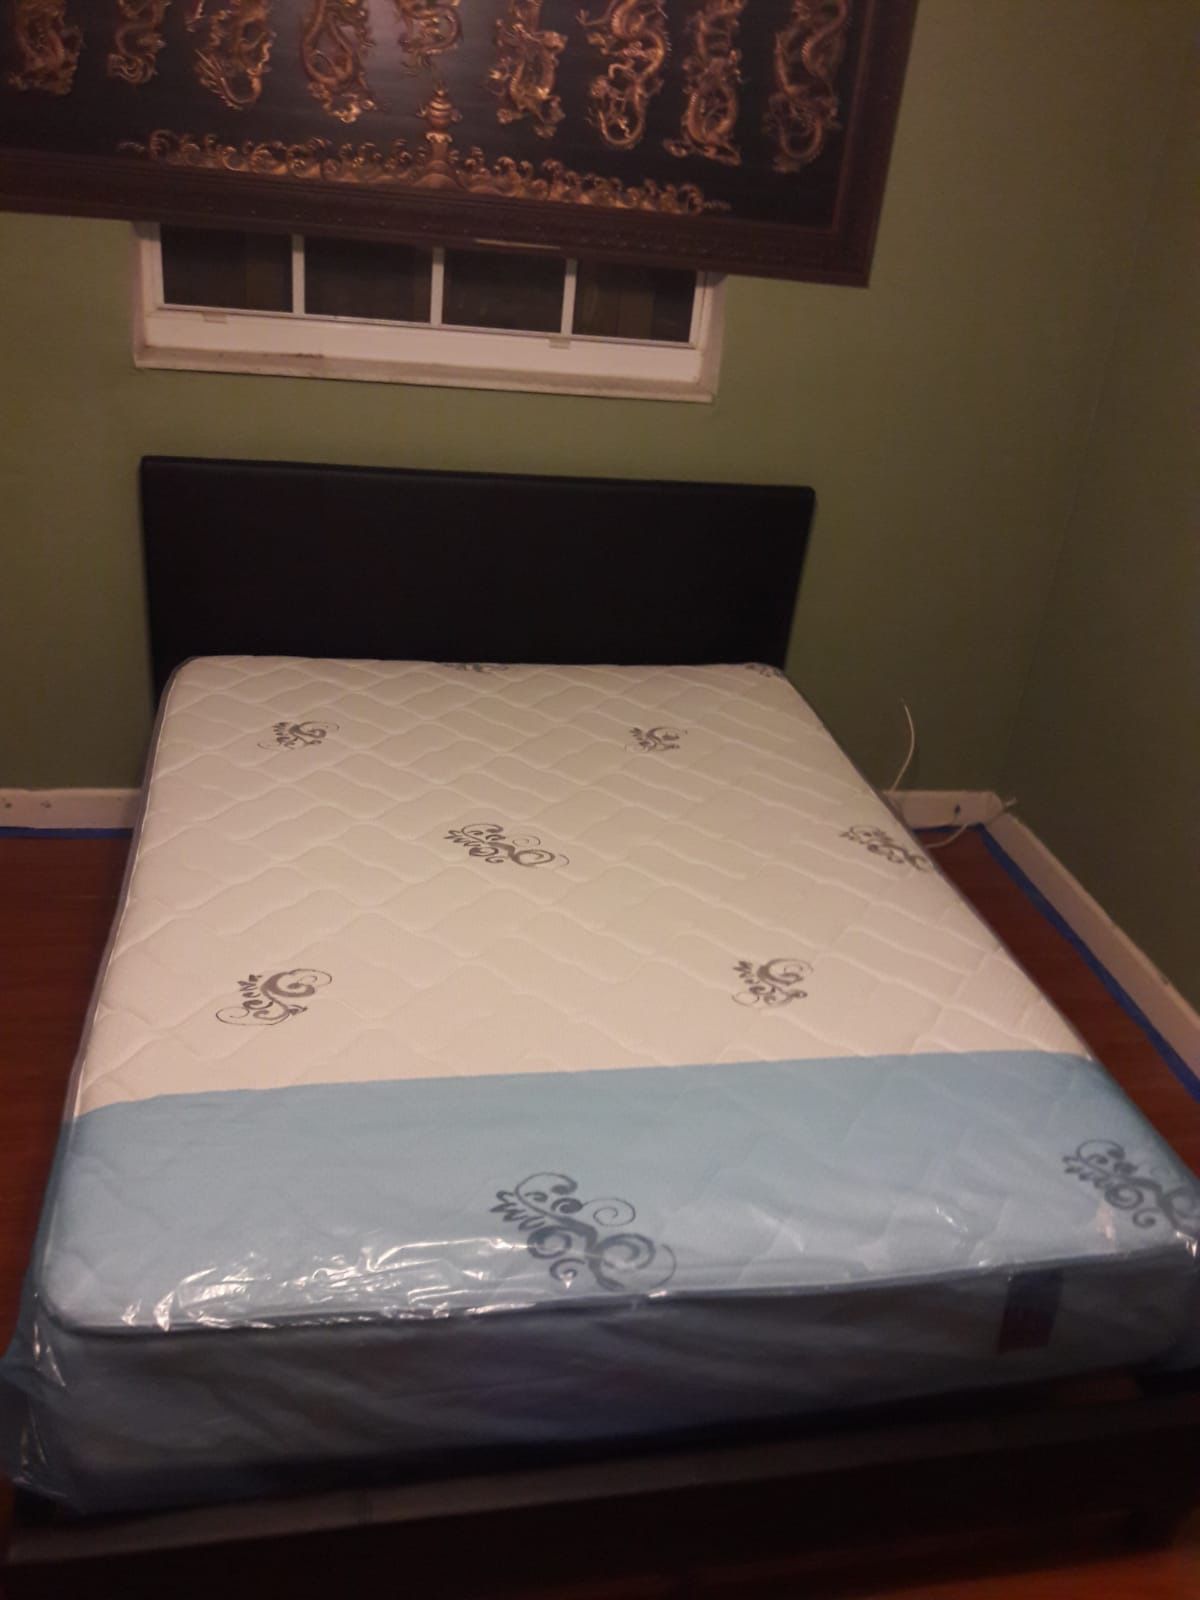 New queen bed frame and mattress included